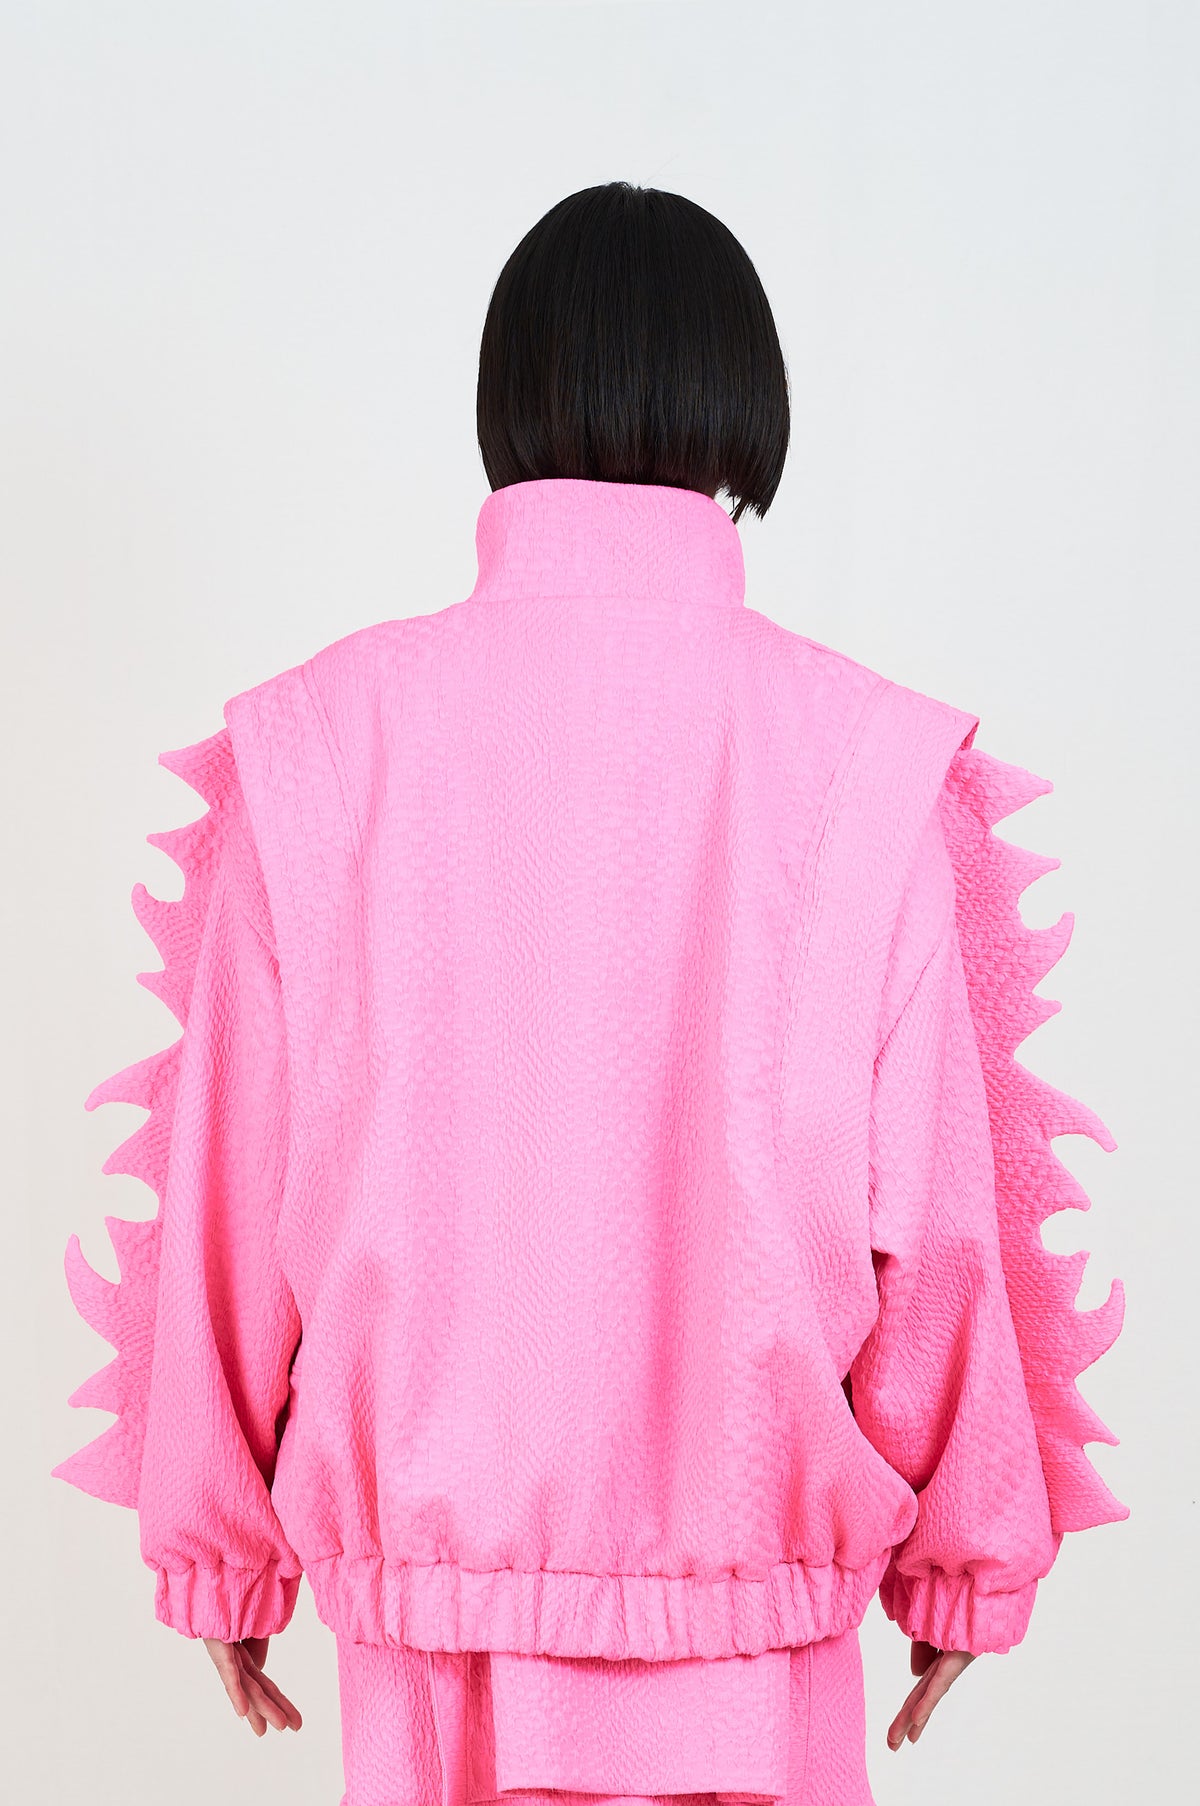 PINK BOMBER JACKET WITH THORNS